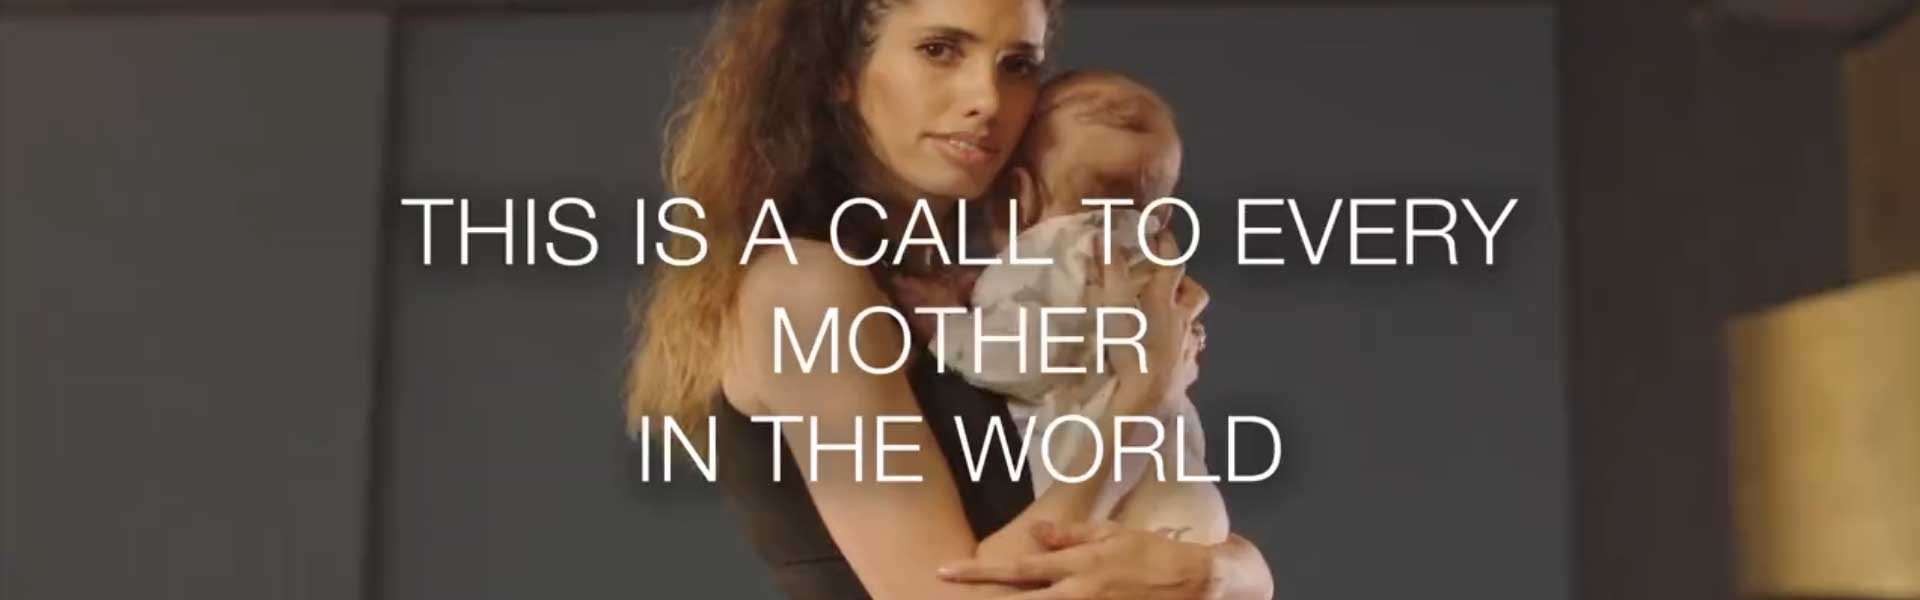 A-call-to-every-mother-in-the-world